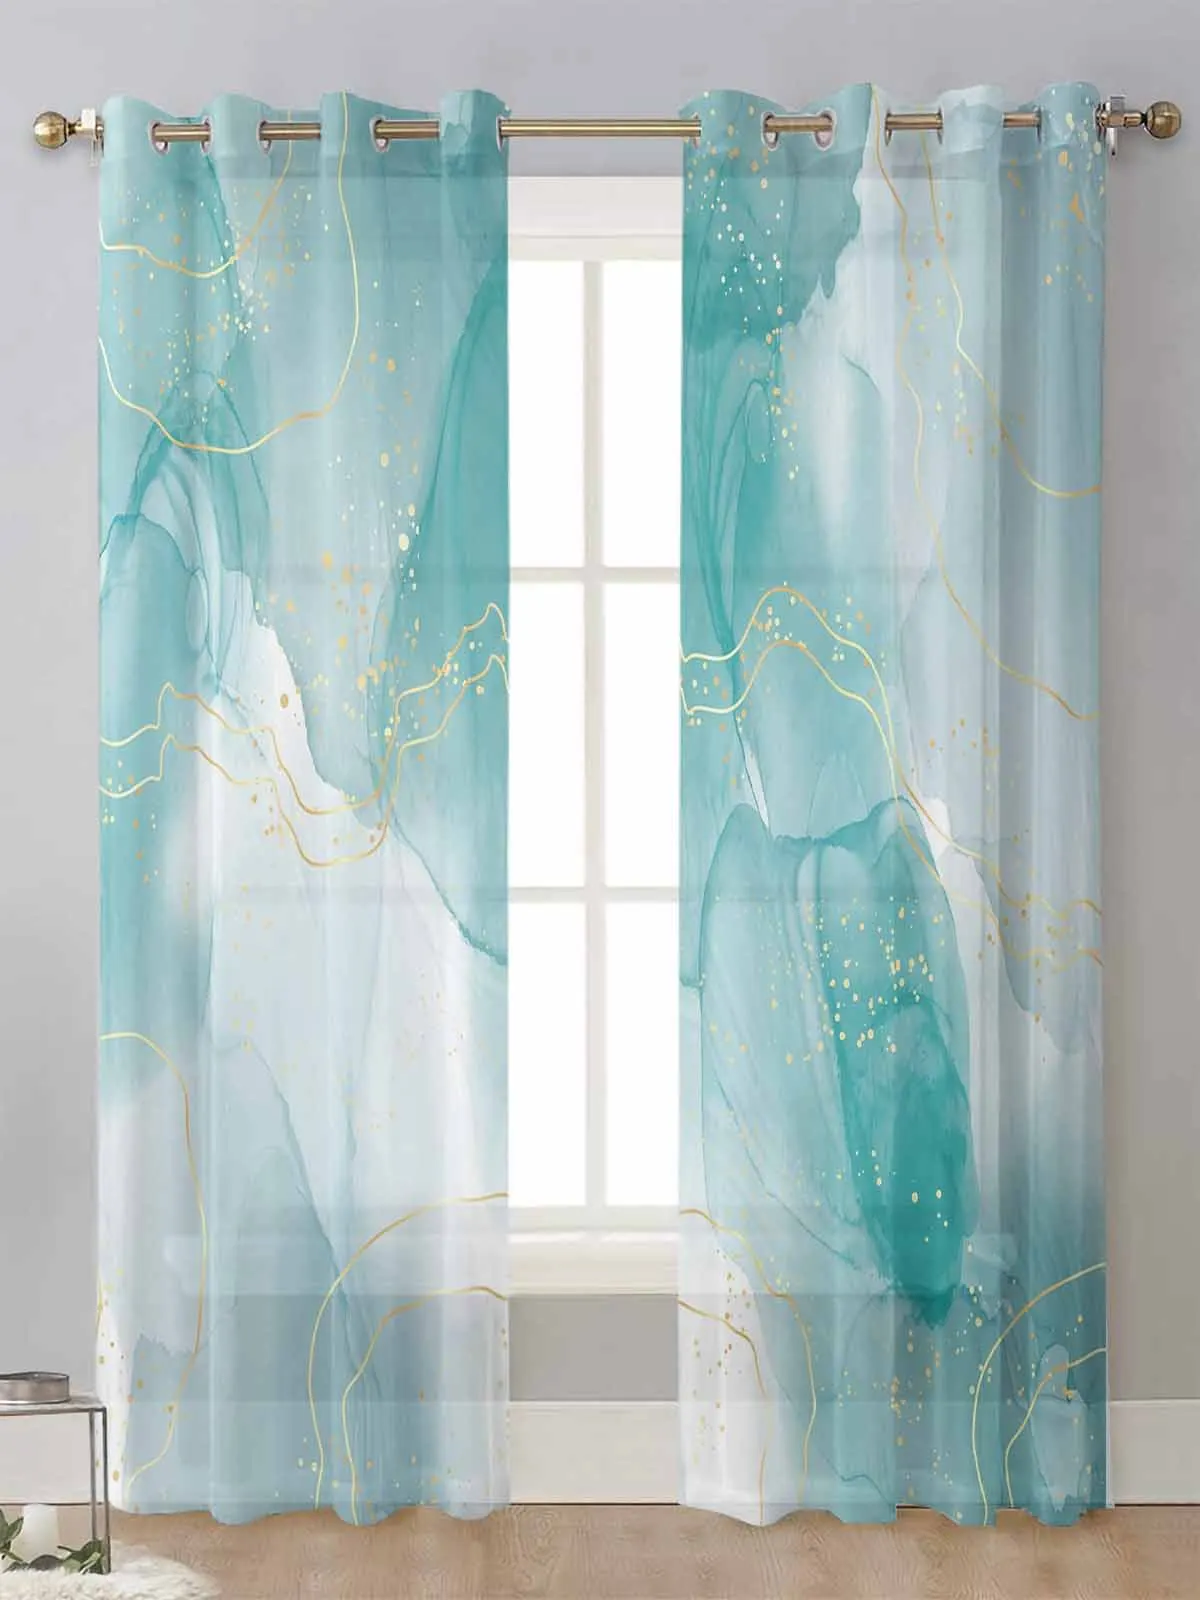 

Marble Aqua Green Gradient Sheer Curtains For Living Room Window Transparent Voile Tulle Curtain Cortinas Drapes Home Decor